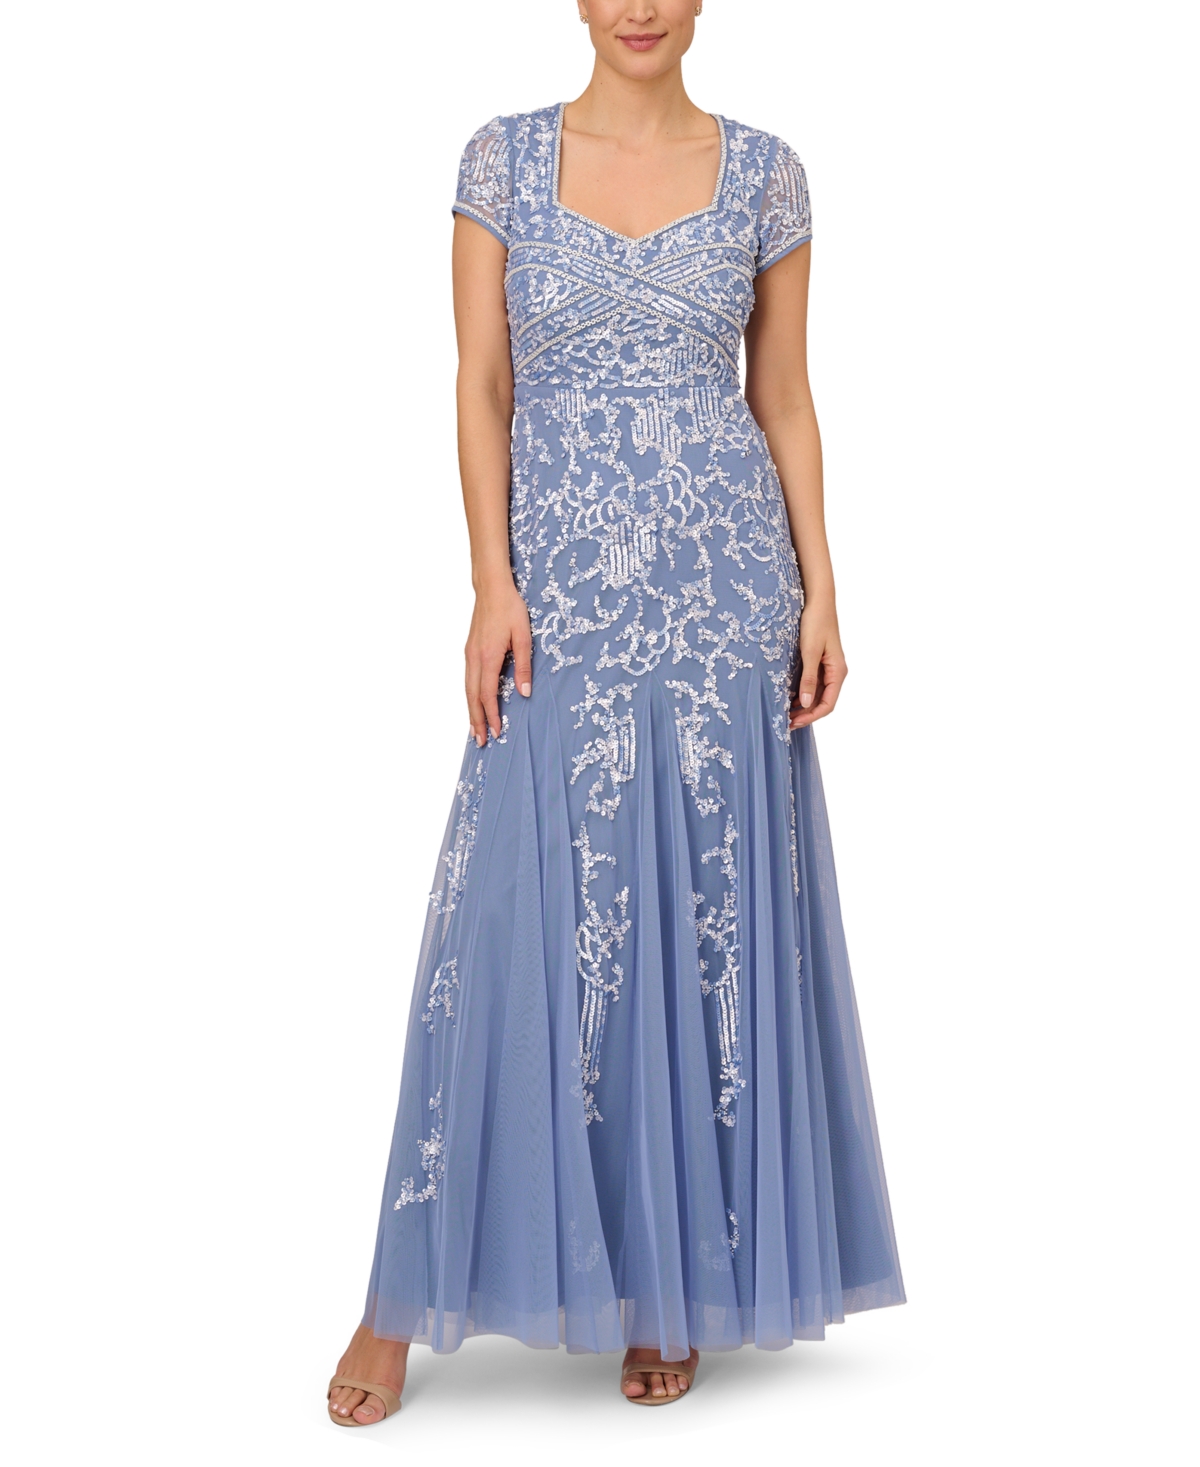 Downton Abbey Inspired Dresses Adrianna Papell Embellished Godet Gown - French Blue $349.00 AT vintagedancer.com